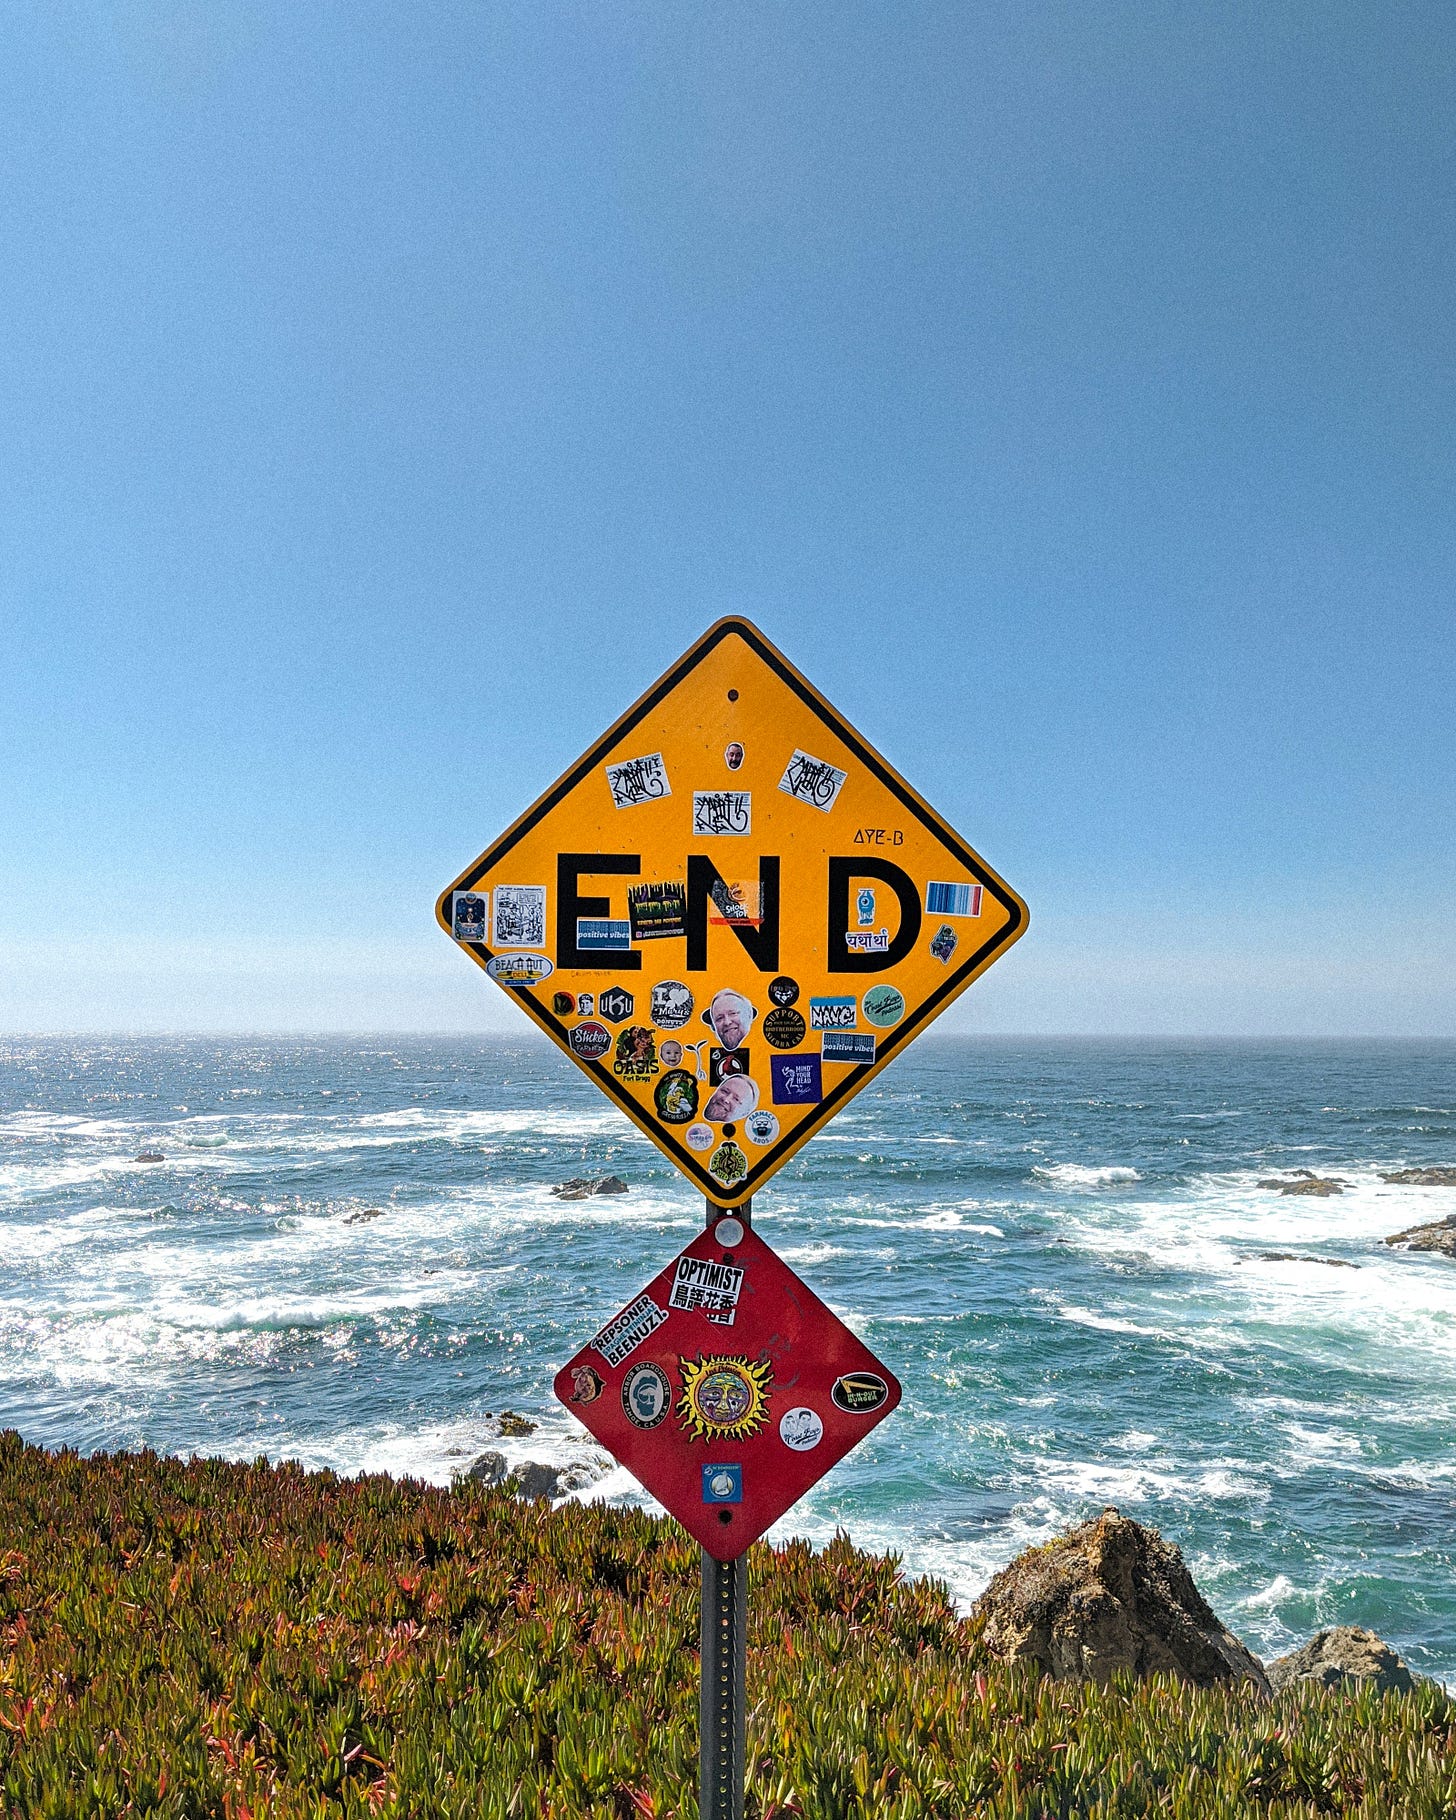 Photo of a street sign that says "end" overlooking a rocky beach.